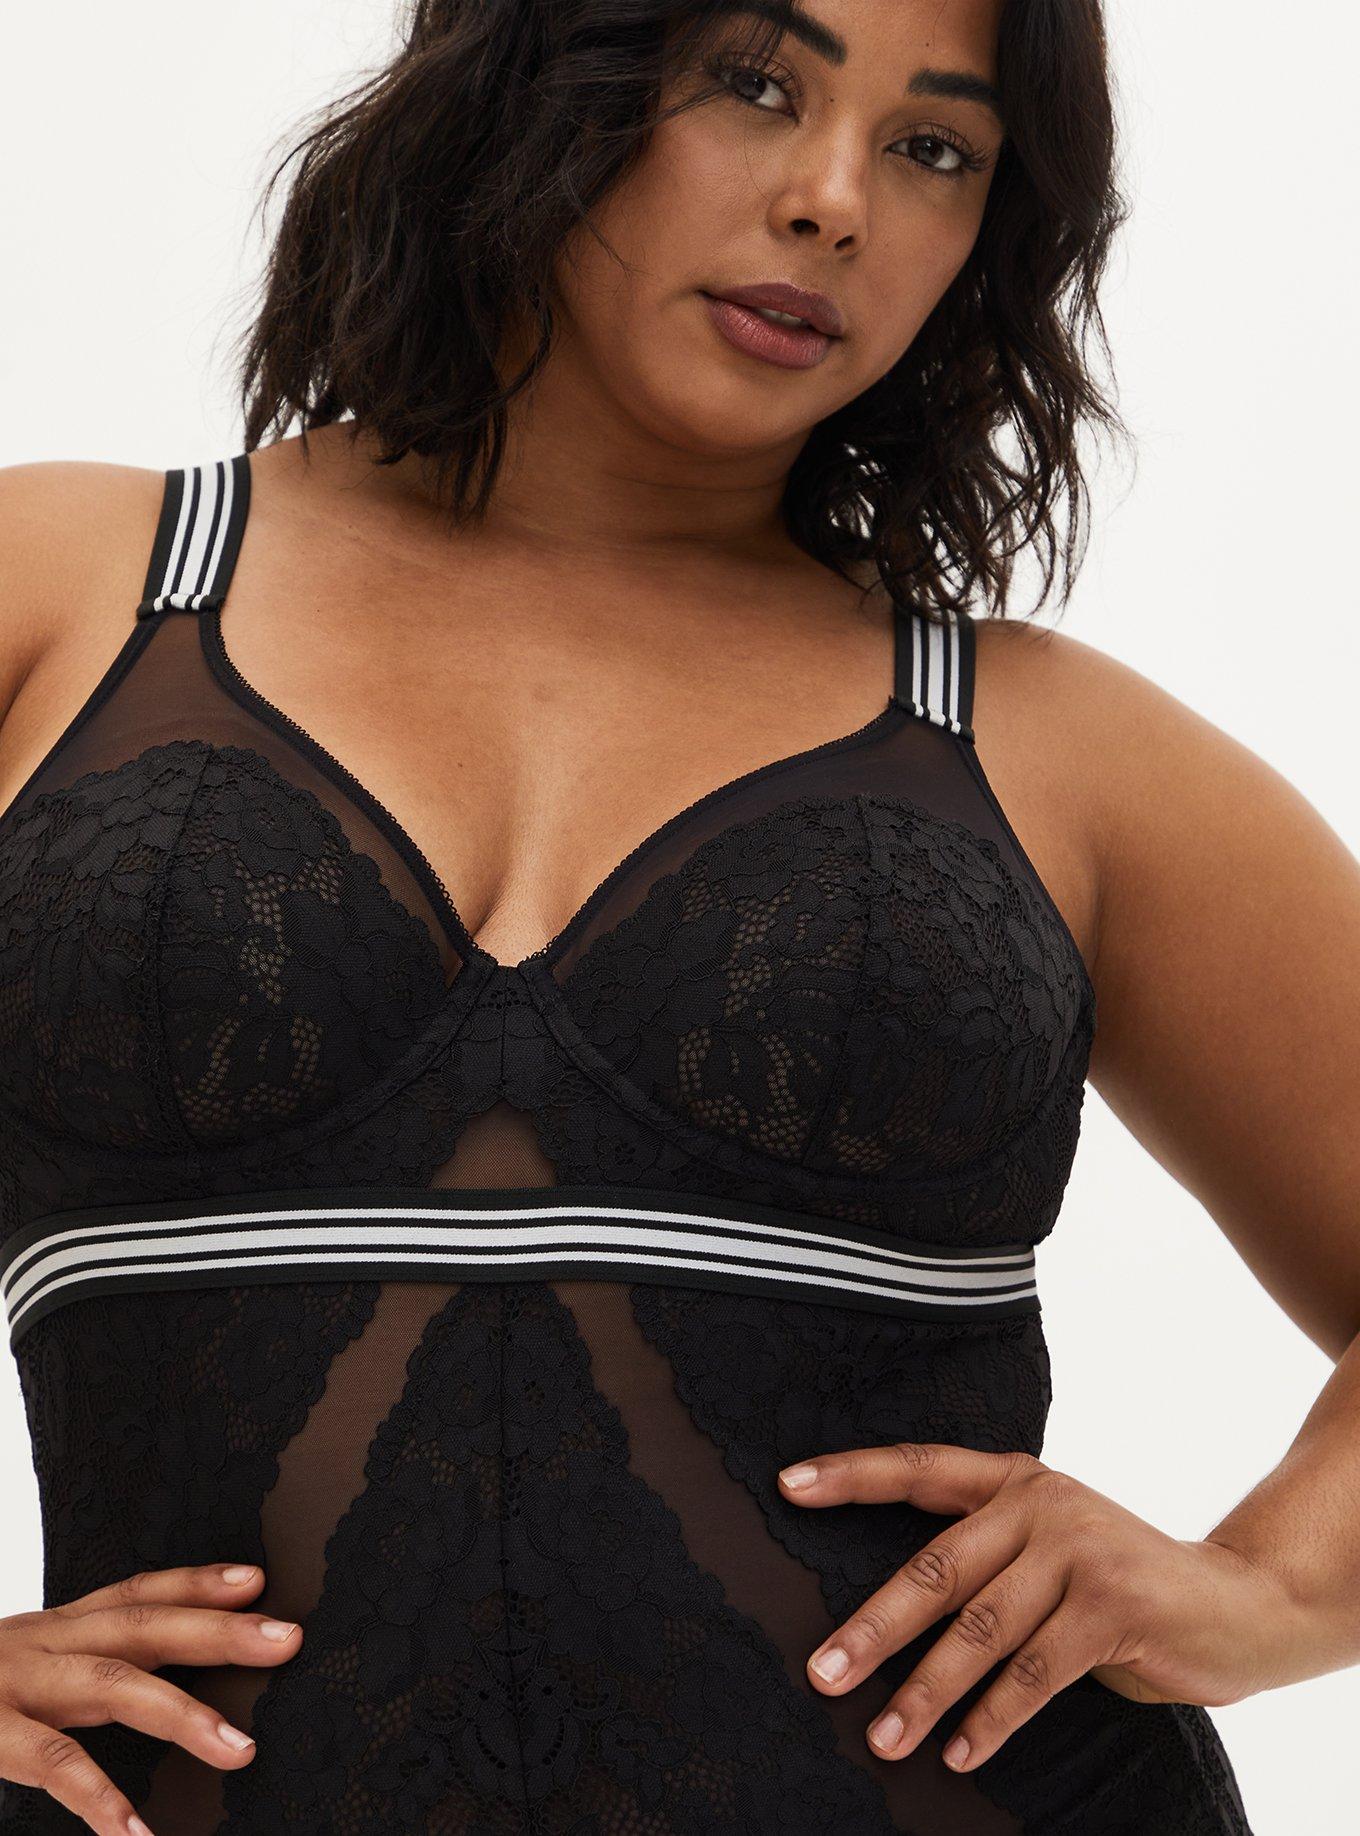 NWT TORRID ONLINE EXCLUSIVE SIZE 4X (26) BLACK MESH STRAPPY